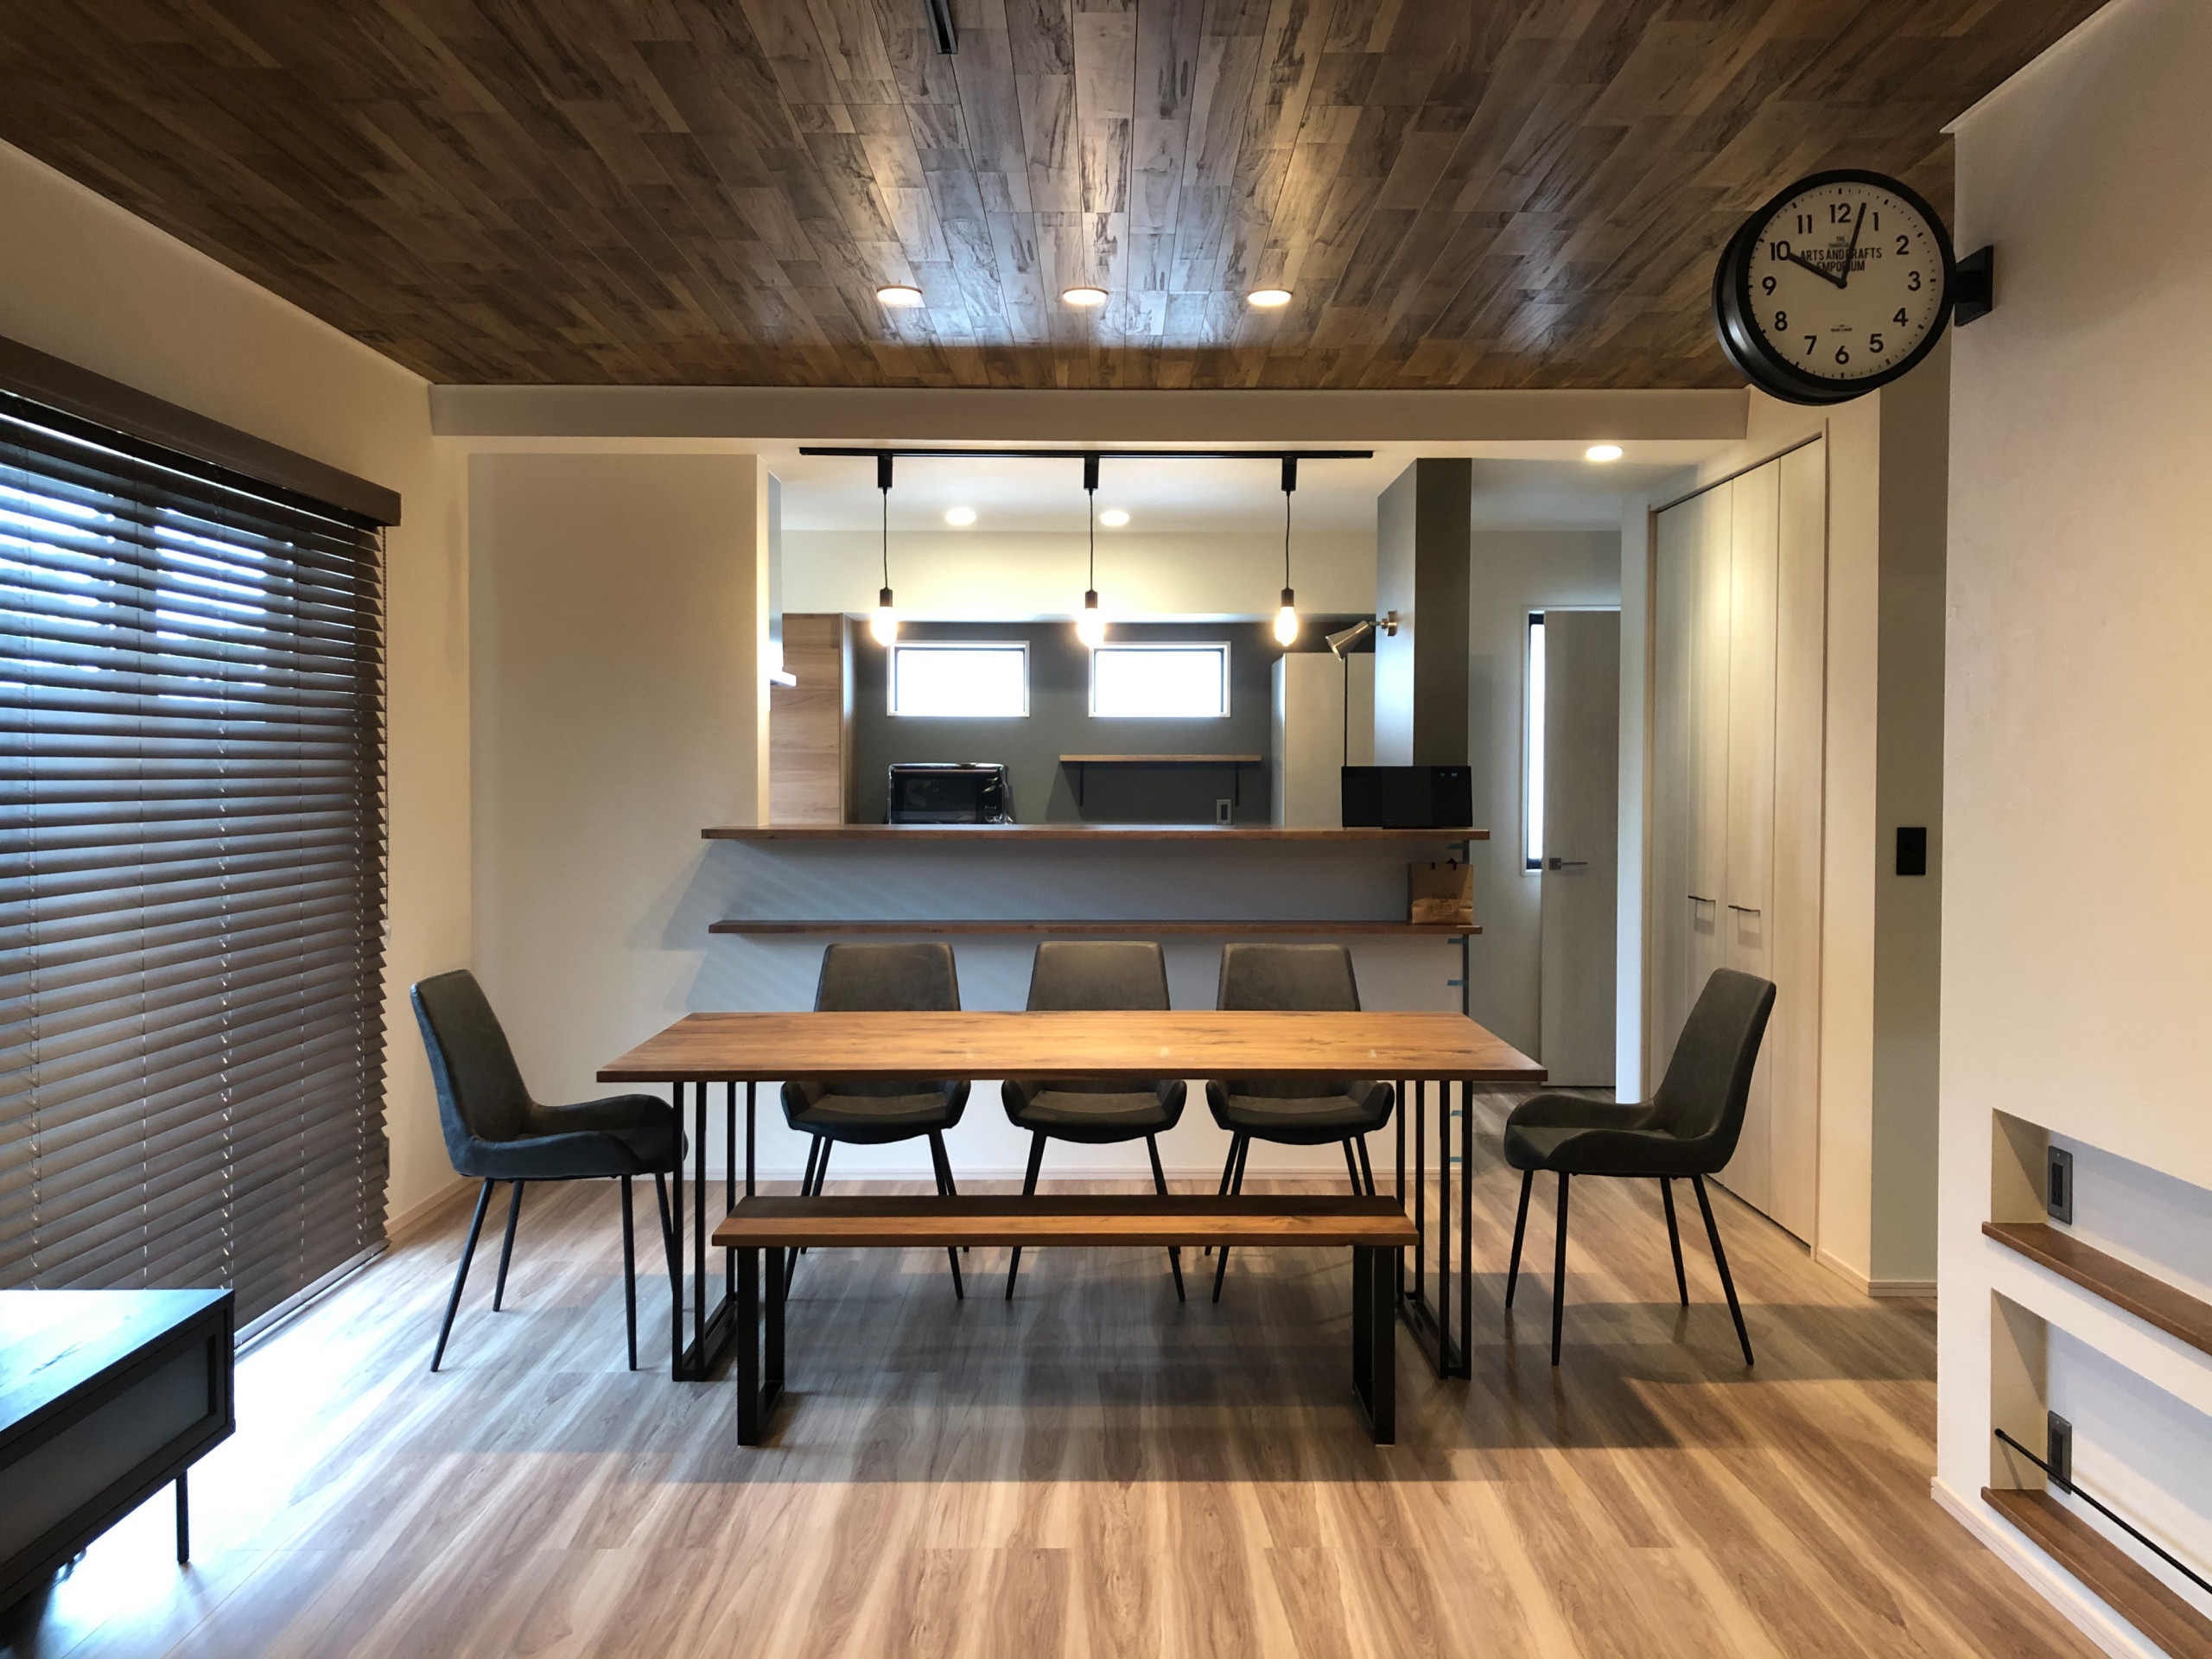 75 Beautiful Industrial Wood Ceiling Dining Room Pictures Ideas September 21 Houzz